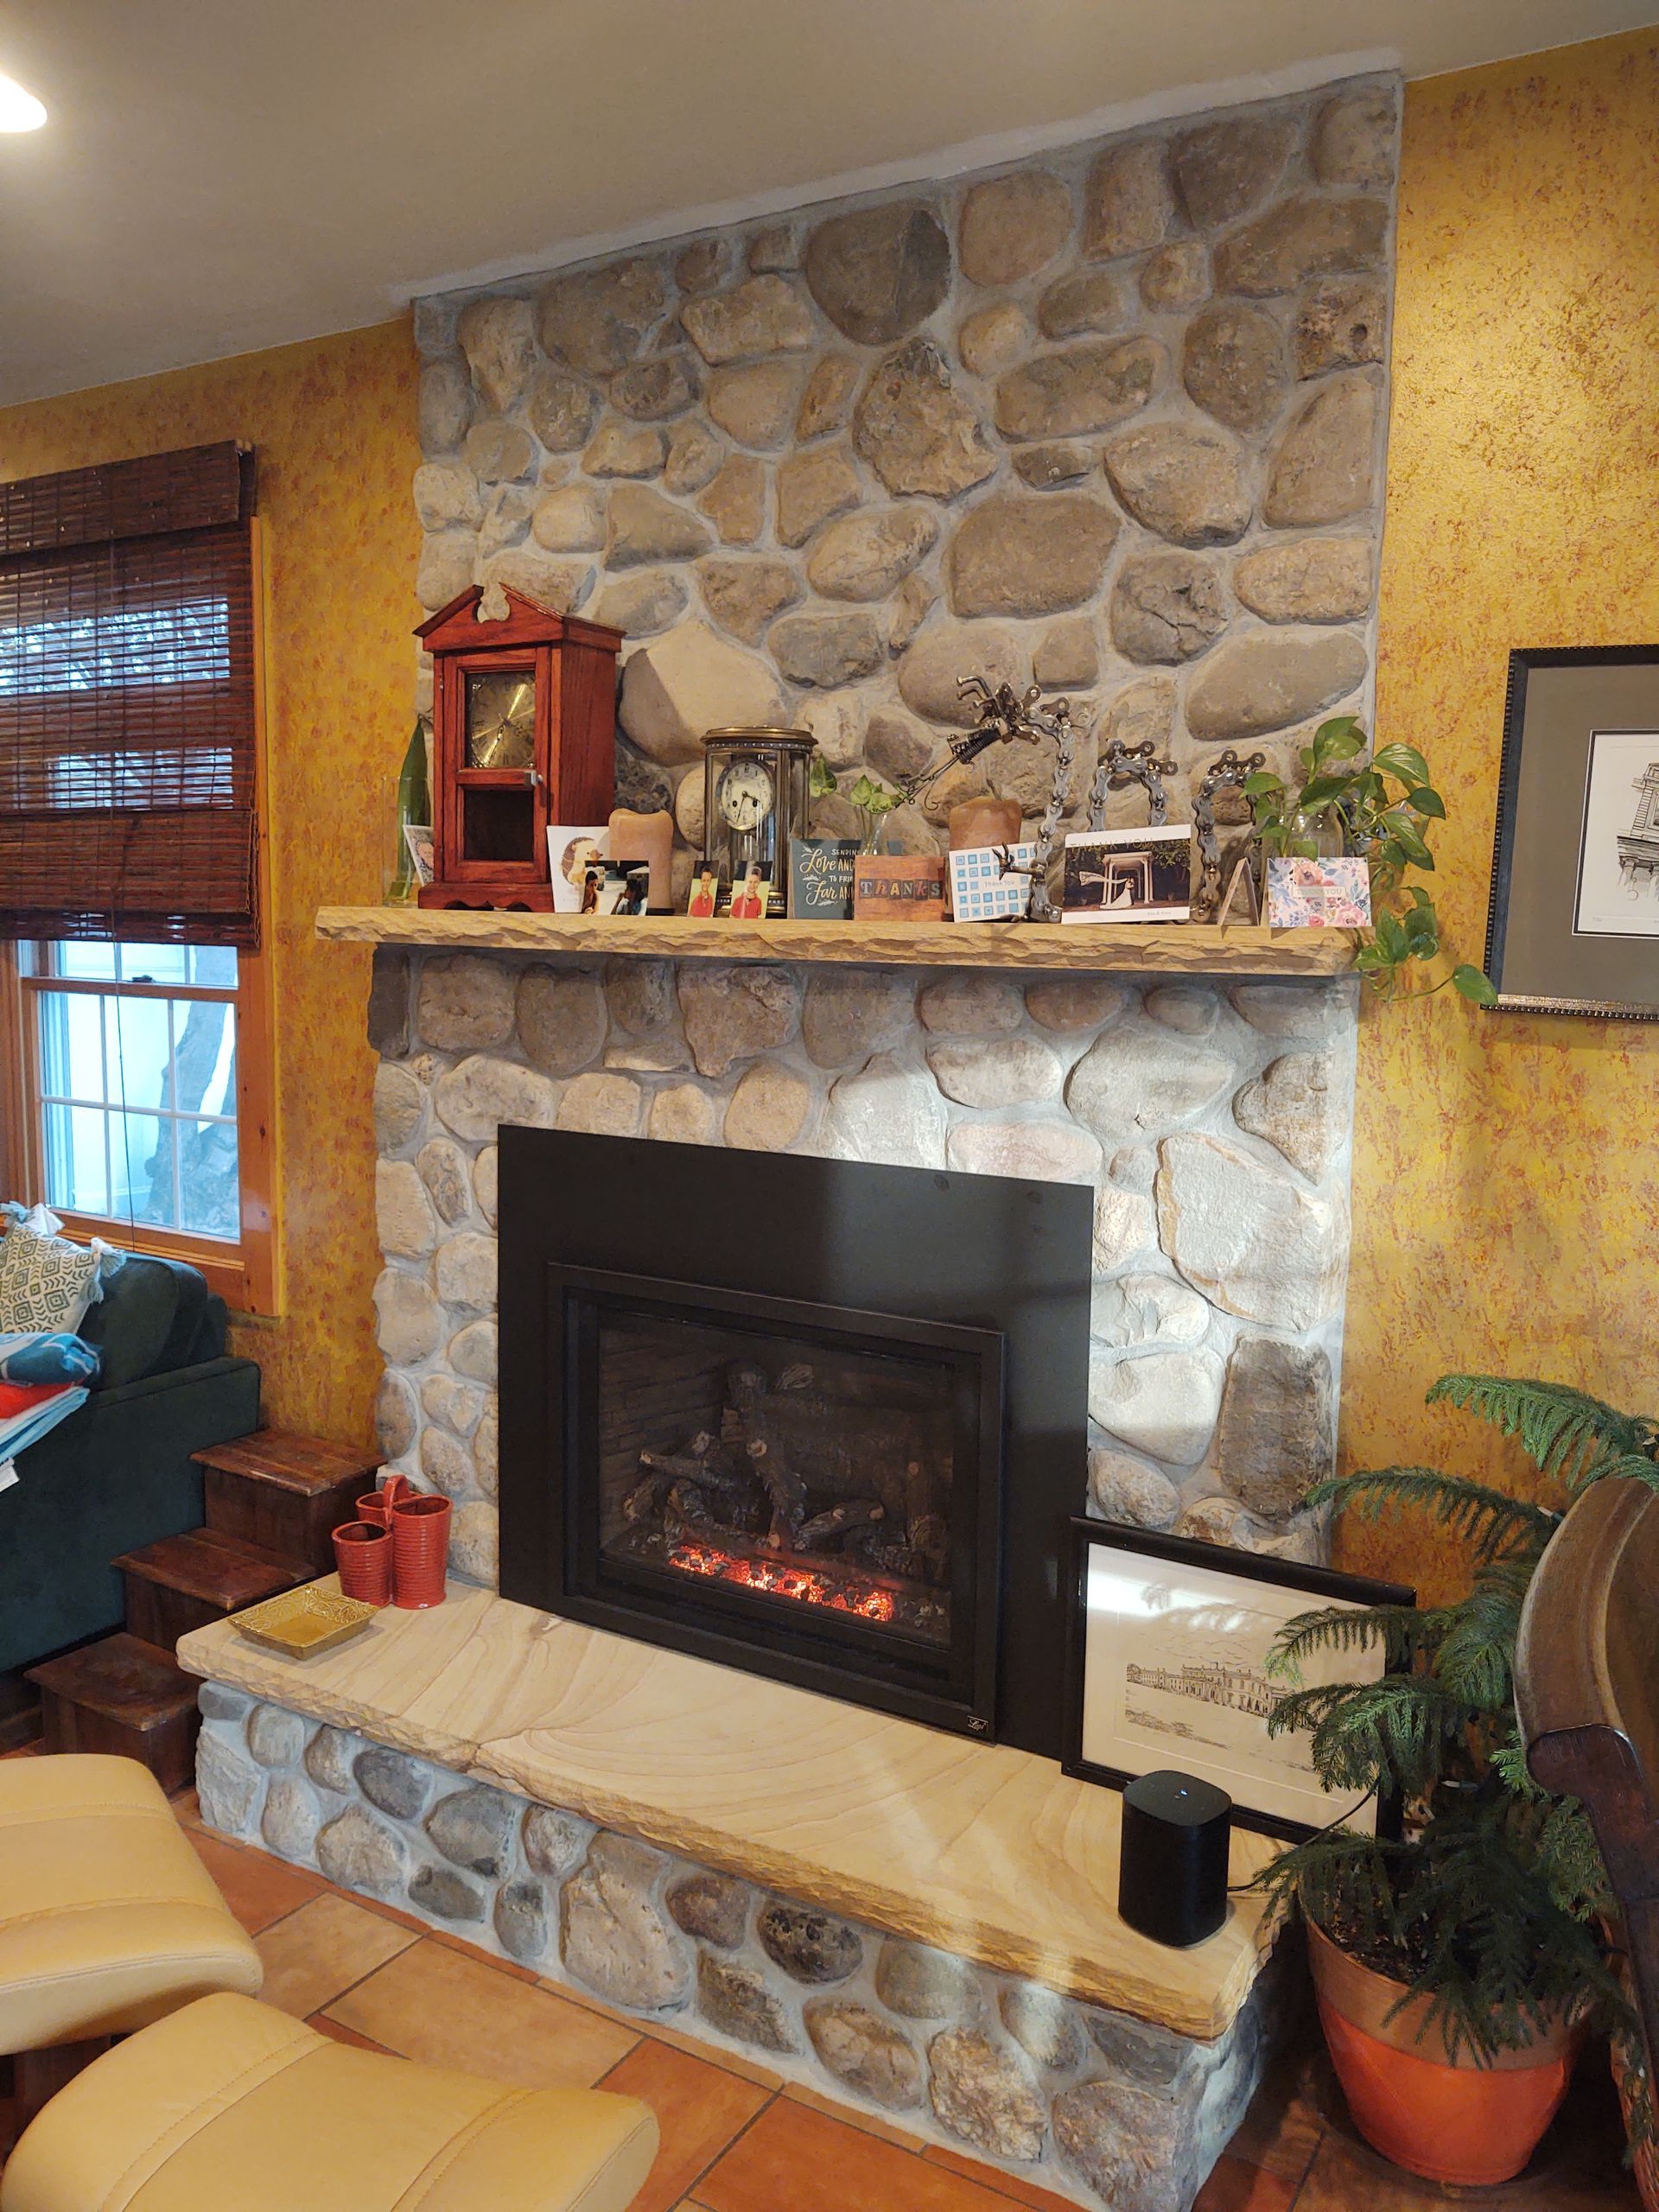 River Rock Fireplace — Modern Fireplace With Brick Wall in Lan ghorne, PA